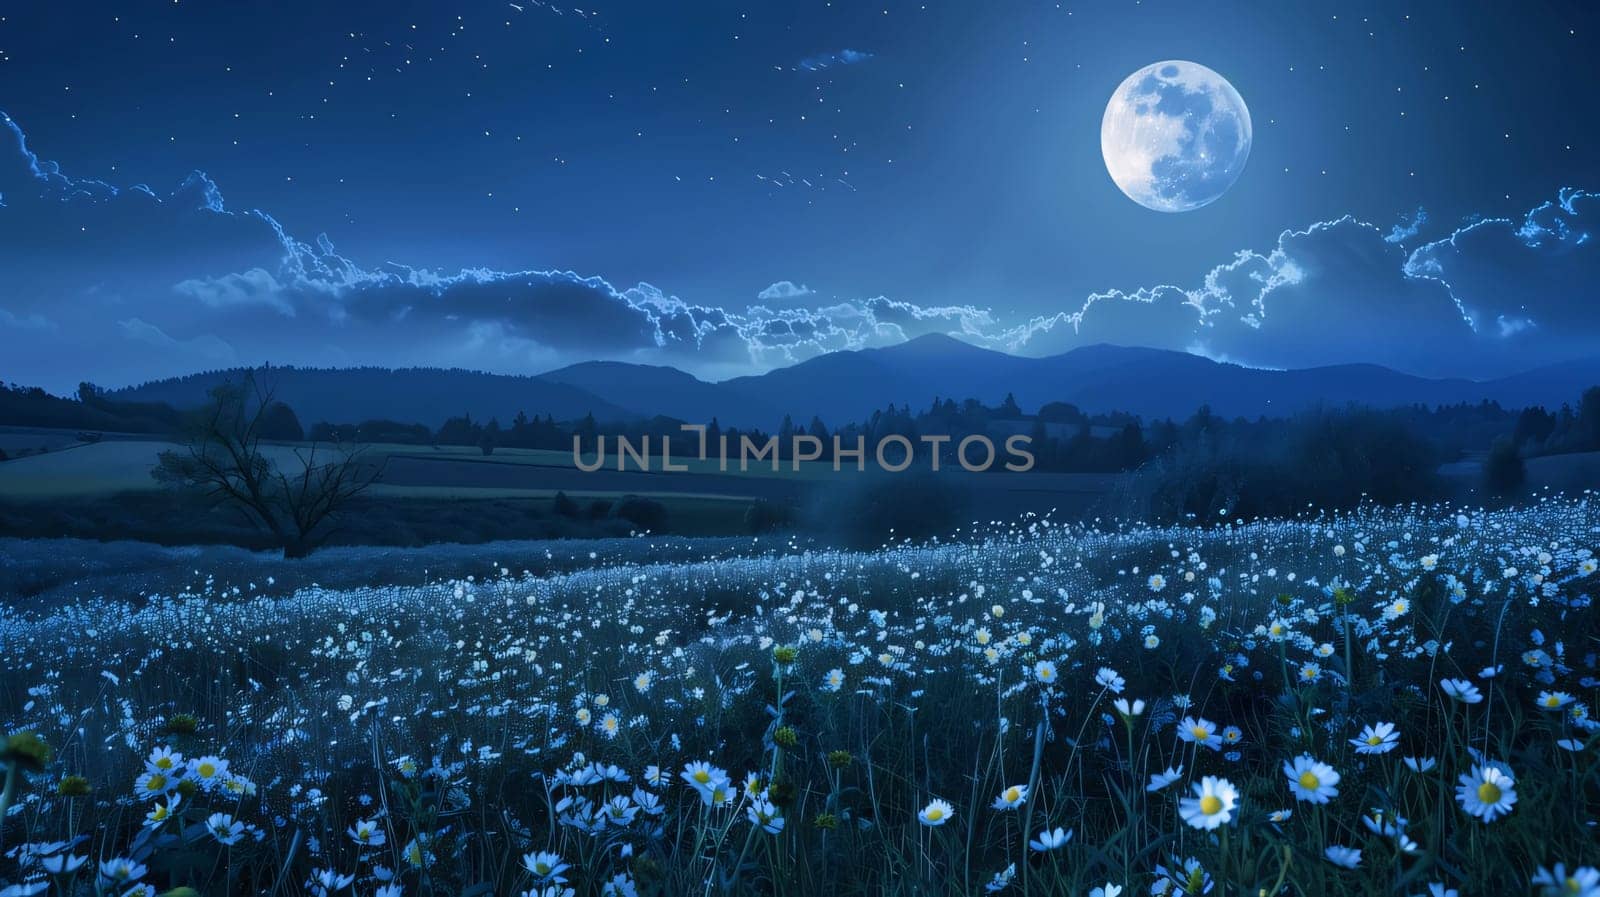 Landscape with a view of a field of flowers at night, in the sky the moon, daisies. Flowering flowers, a symbol of spring, new life. A joyful time of nature waking up to life.